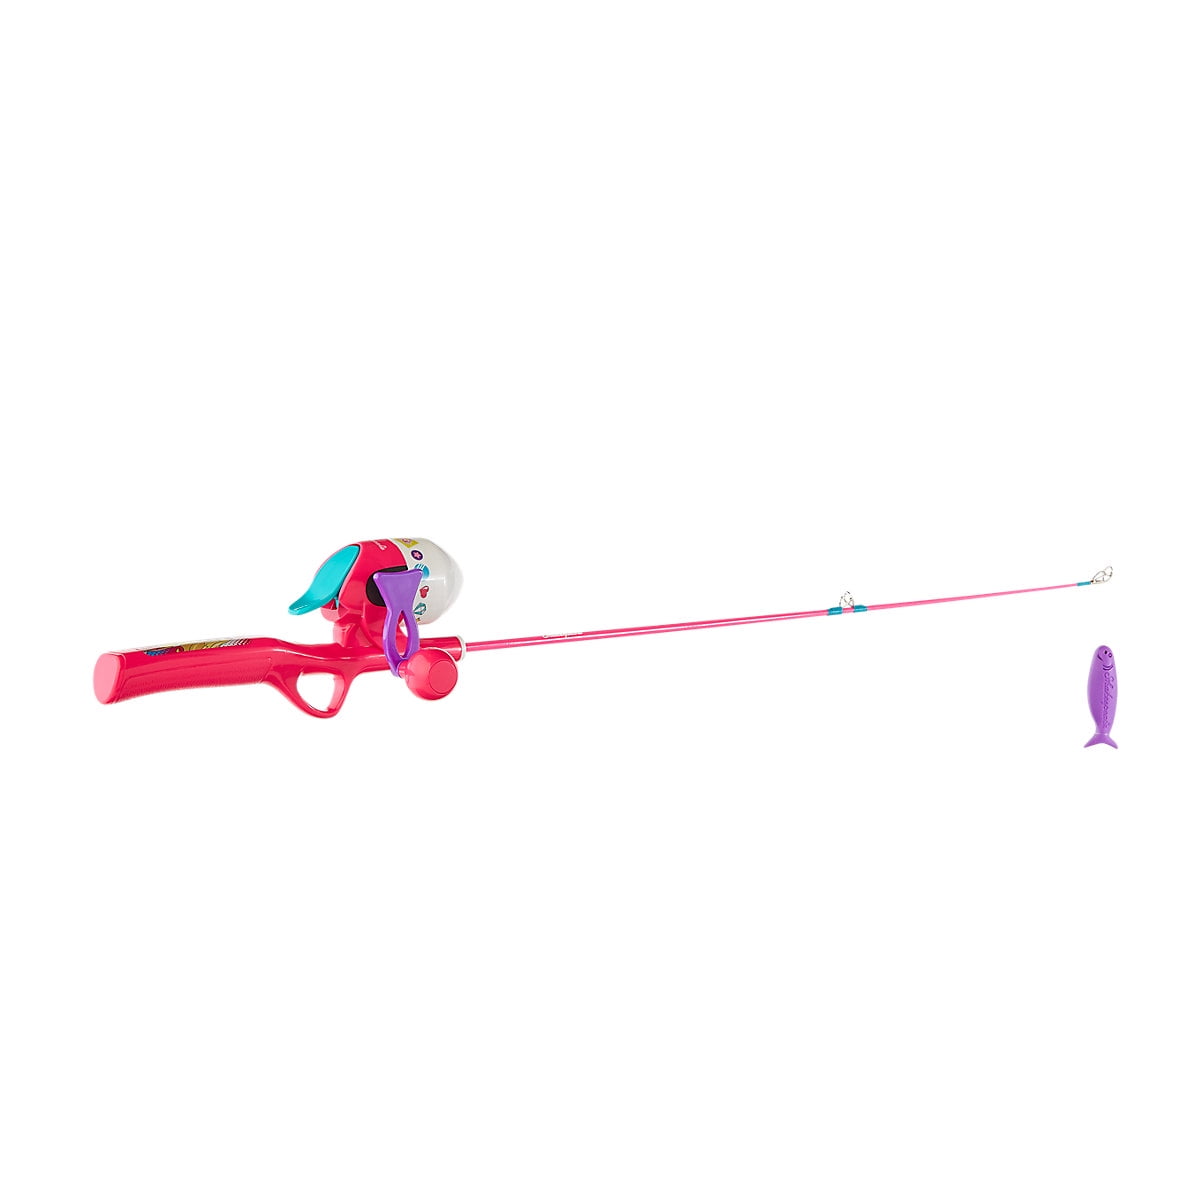 Shakespeare Spiderman Youth Spincasting Rod And Reel Combo, 55% OFF